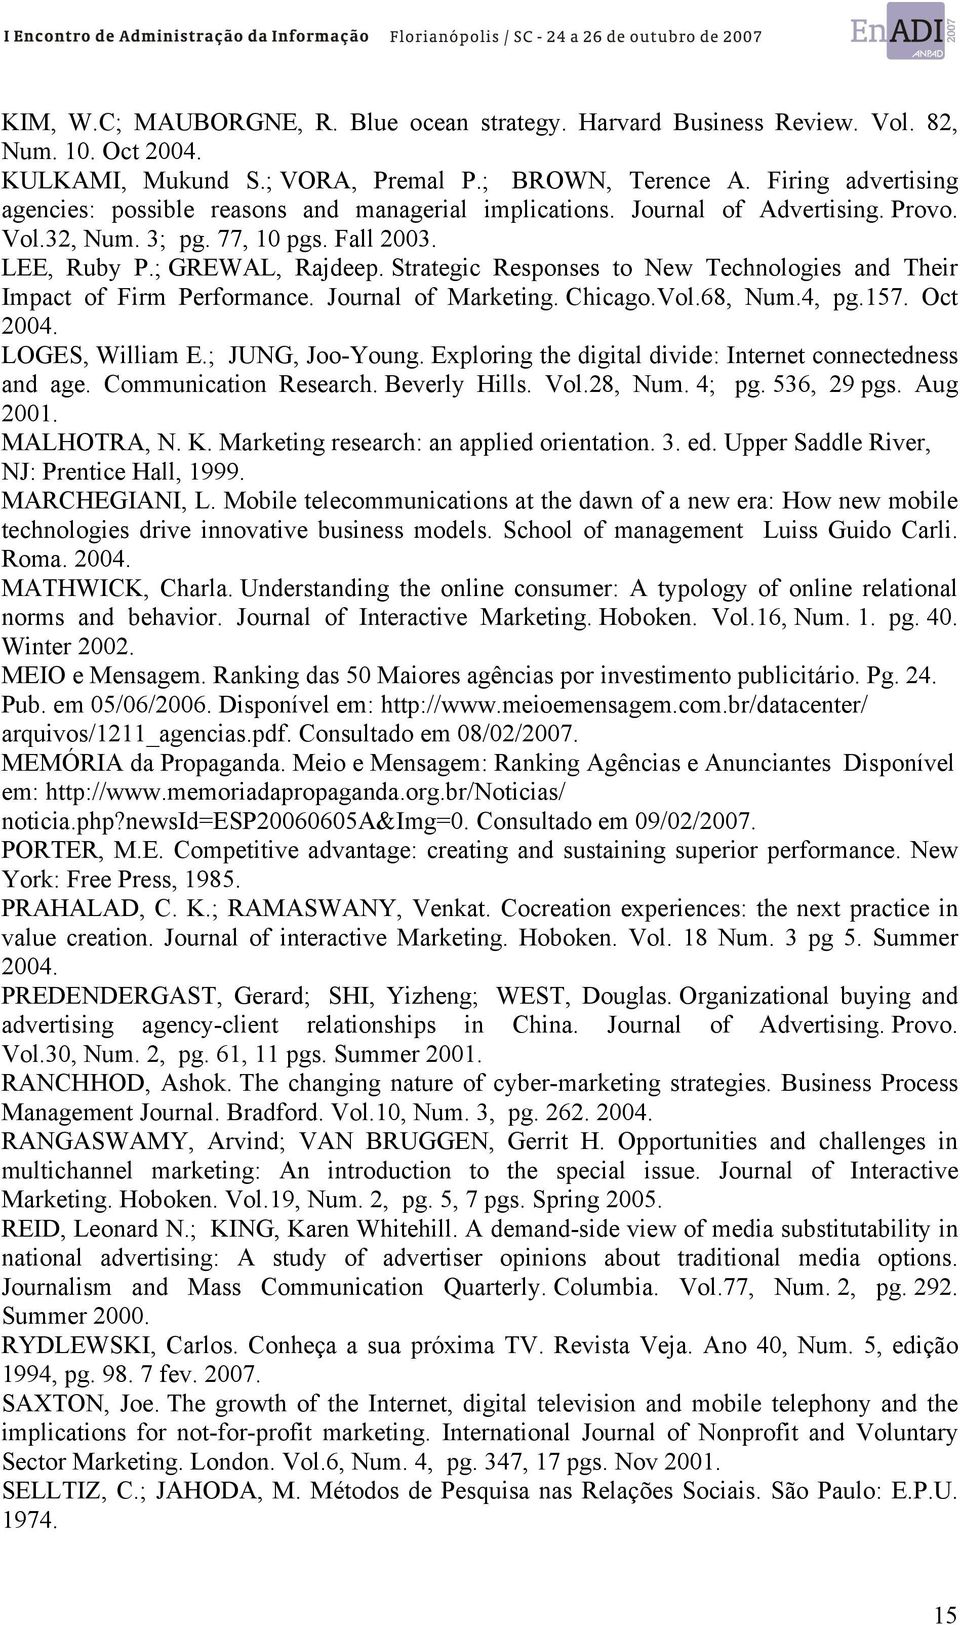 Strategic Responses to New Technologies and Their Impact of Firm Performance. Journal of Marketing. Chicago.Vol.68, Num.4, pg.157. Oct 2004. LOGES, William E.; JUNG, Joo-Young.